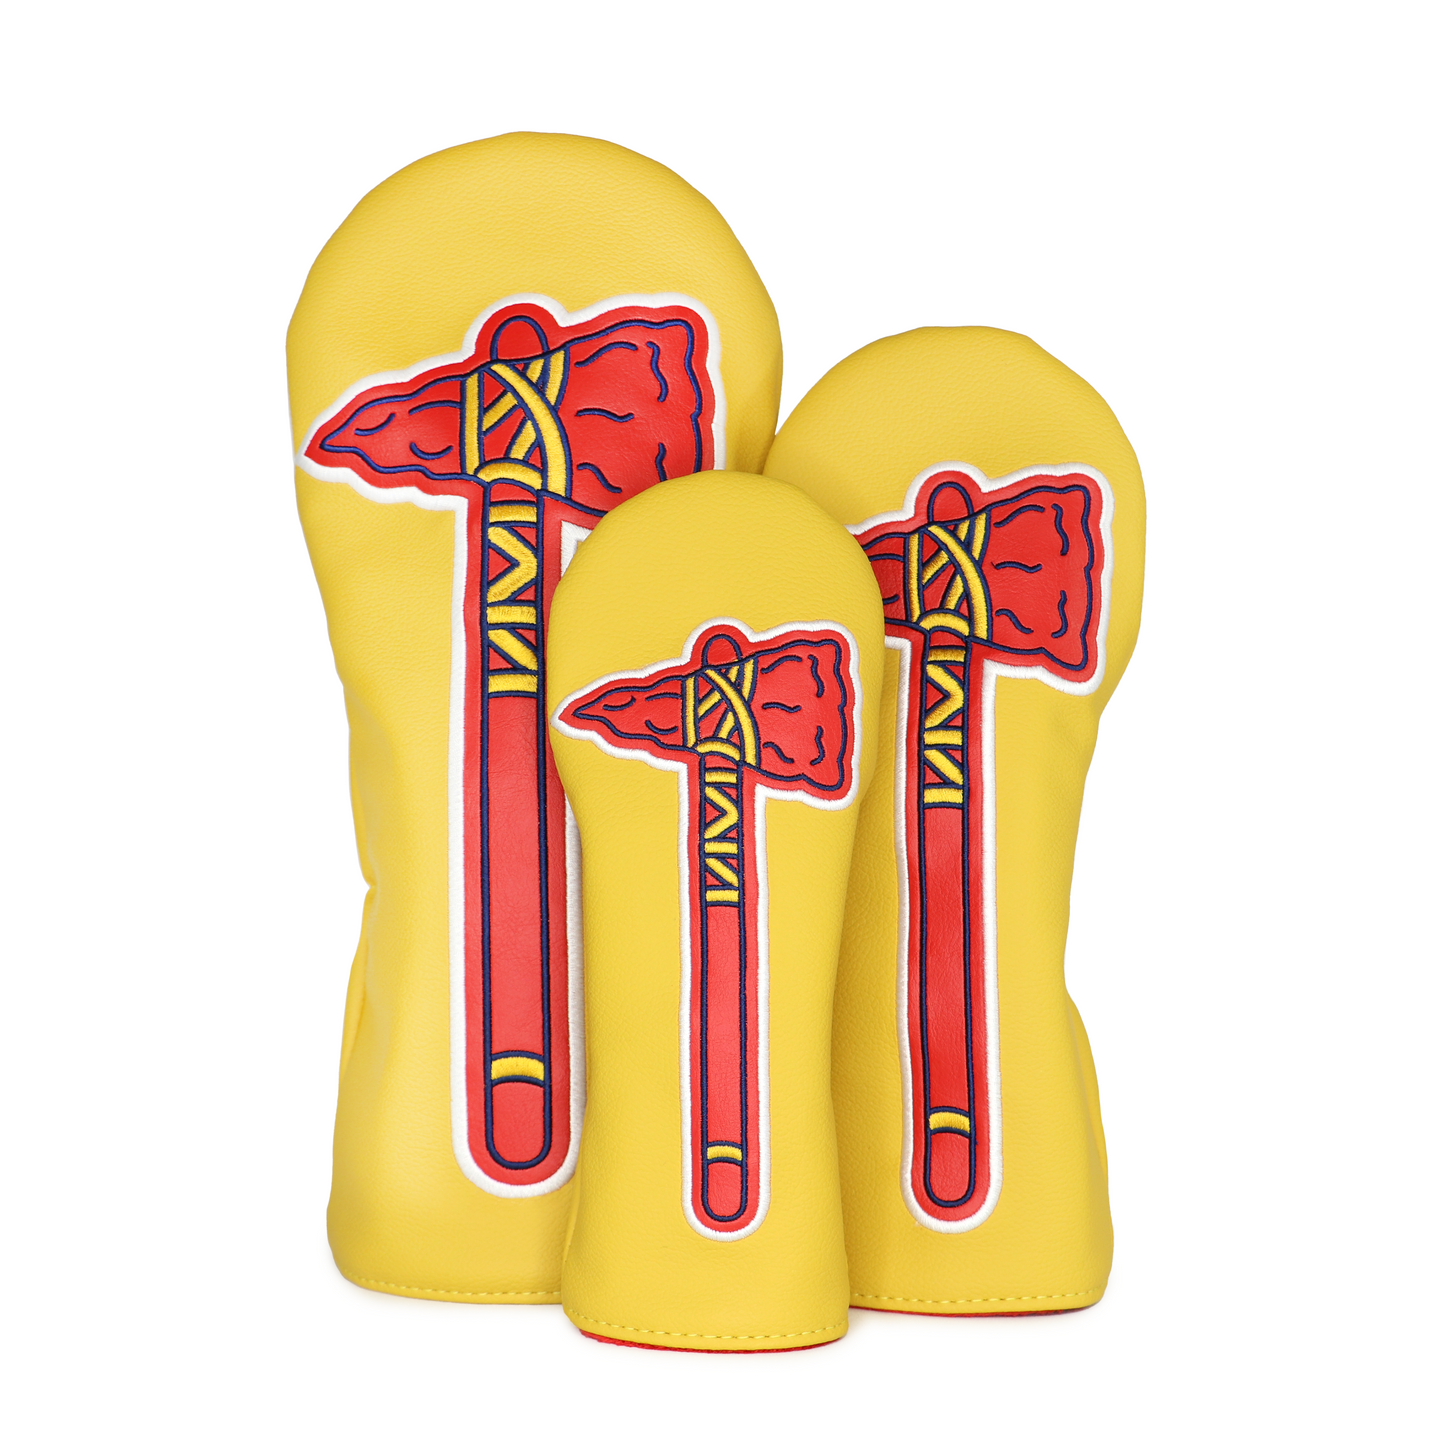 St. Louis Cardinals Driver Cover – EP Headcovers